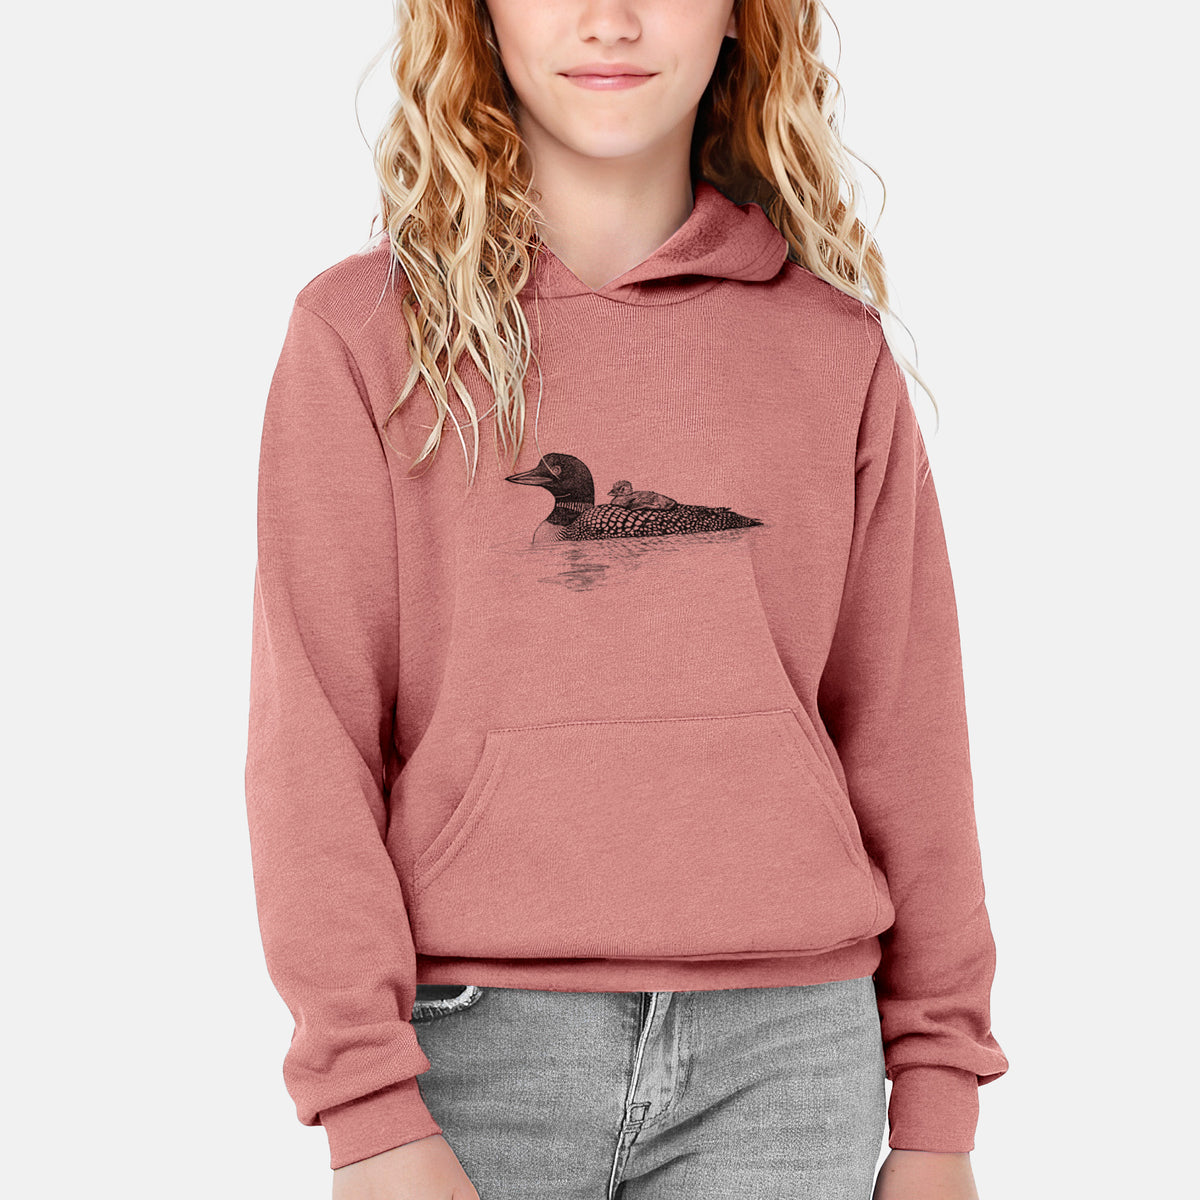 Common Loon with Chick - Gavia immer - Youth Hoodie Sweatshirt